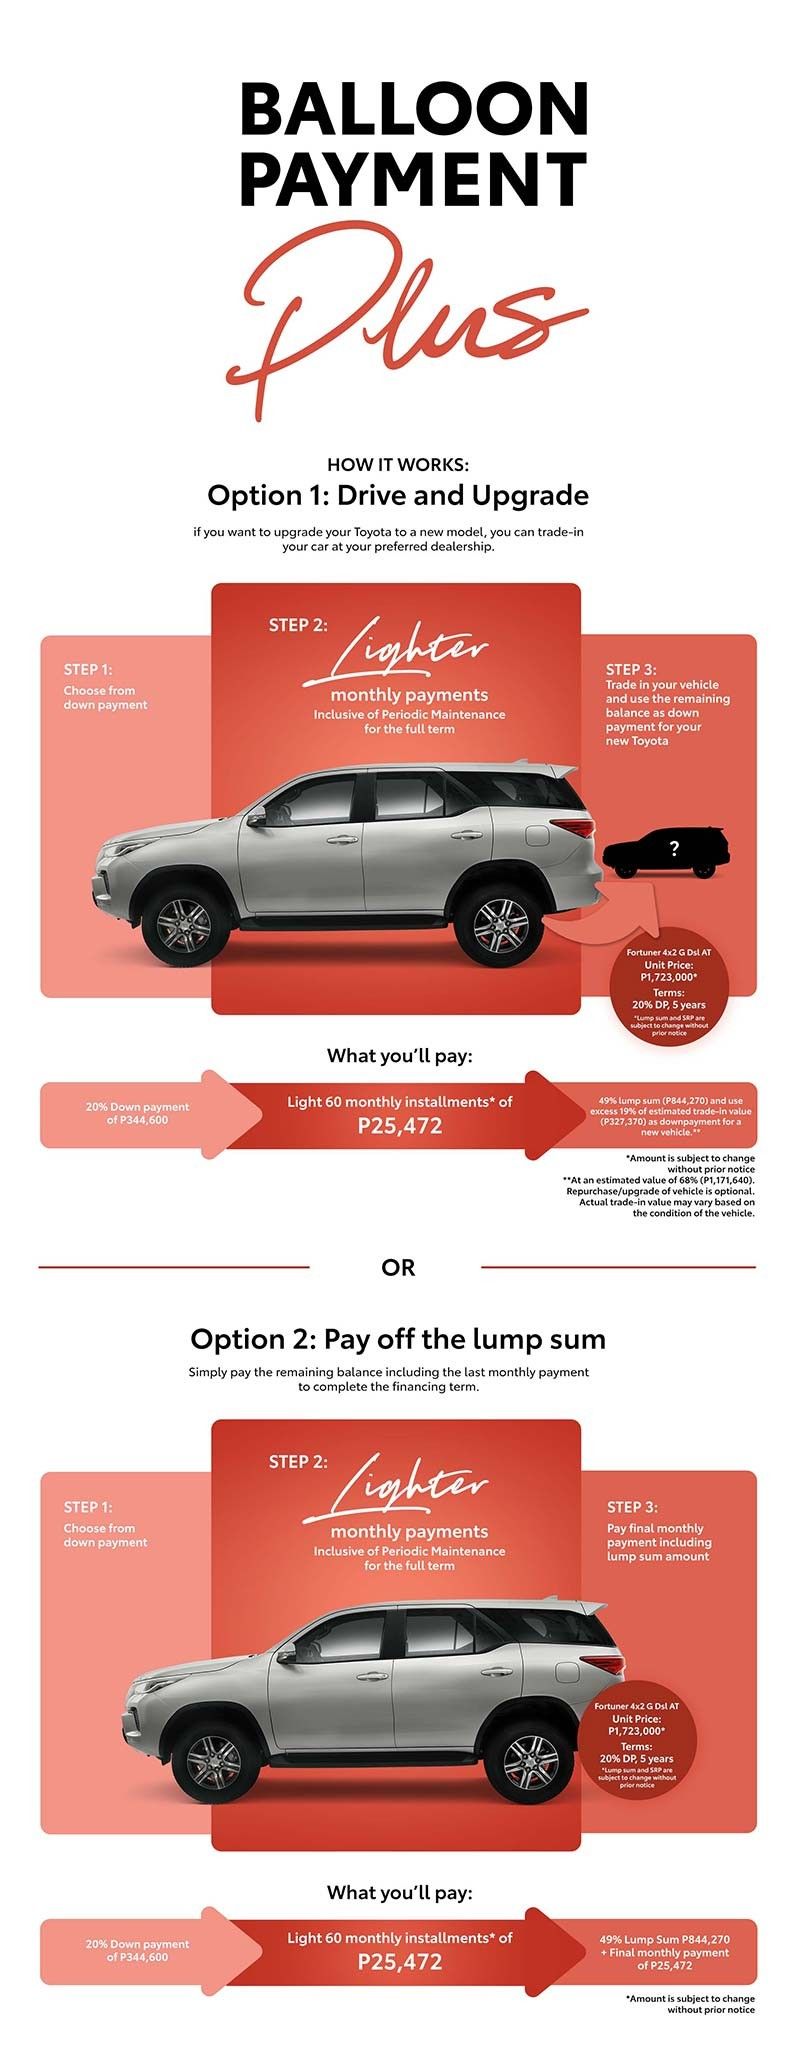 Ever tried leasing a new car? 5 reasons to apply for Toyota’s Balloon Payment Plus